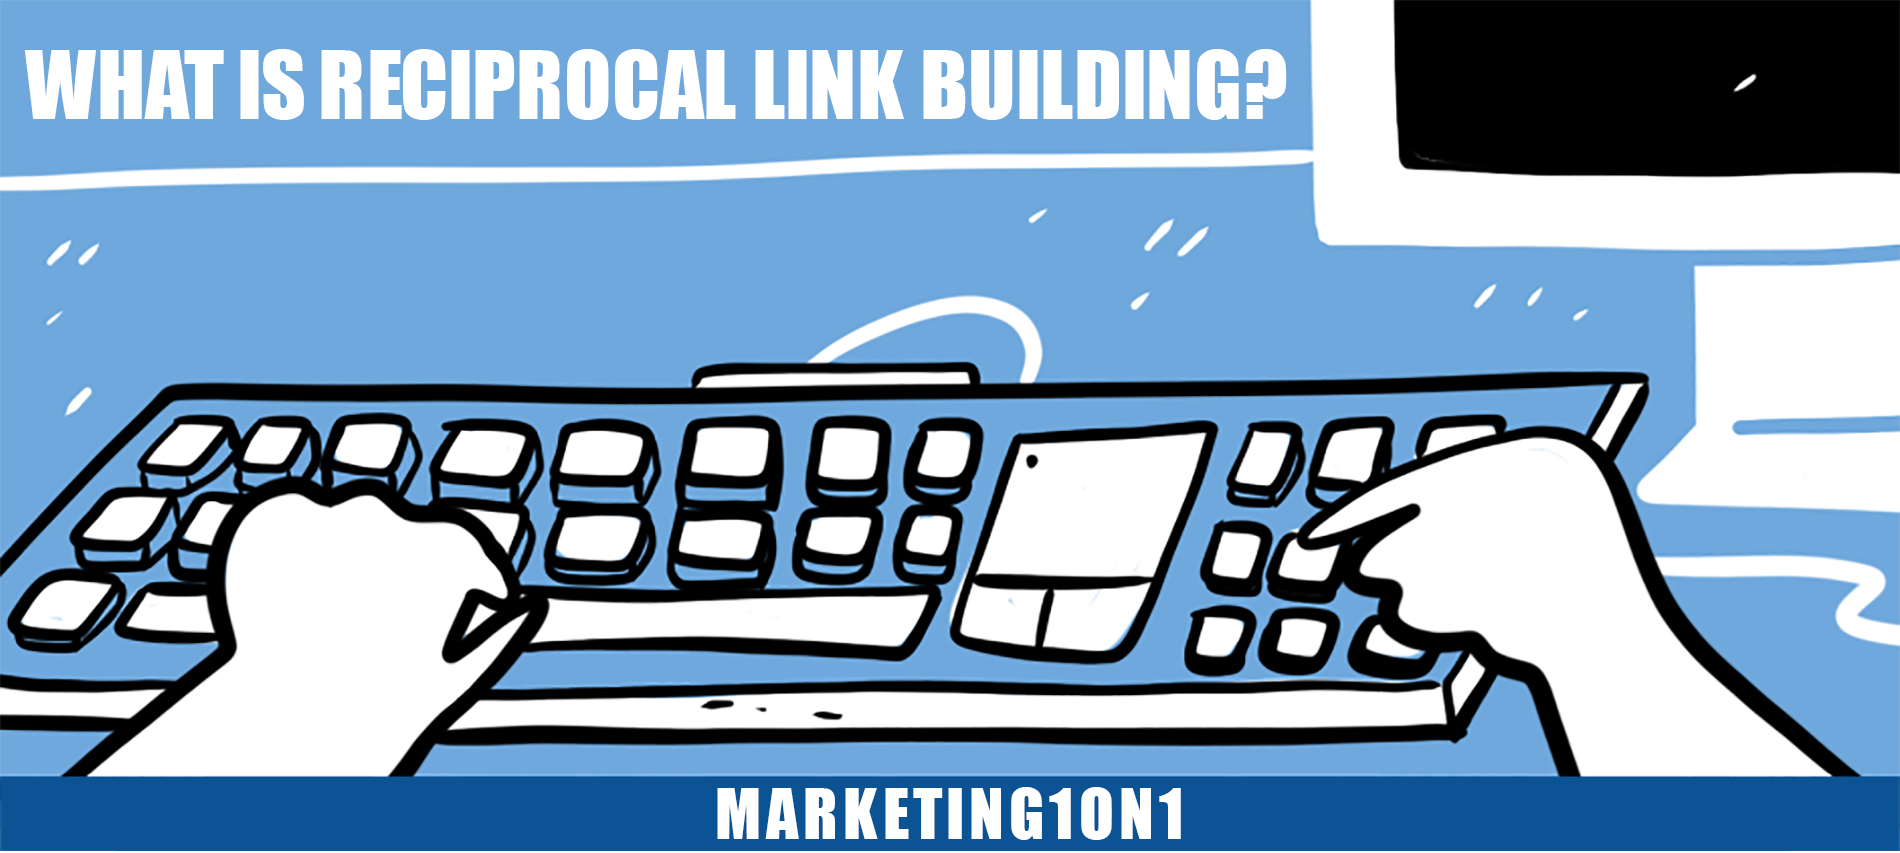 What is reciprocal link building?